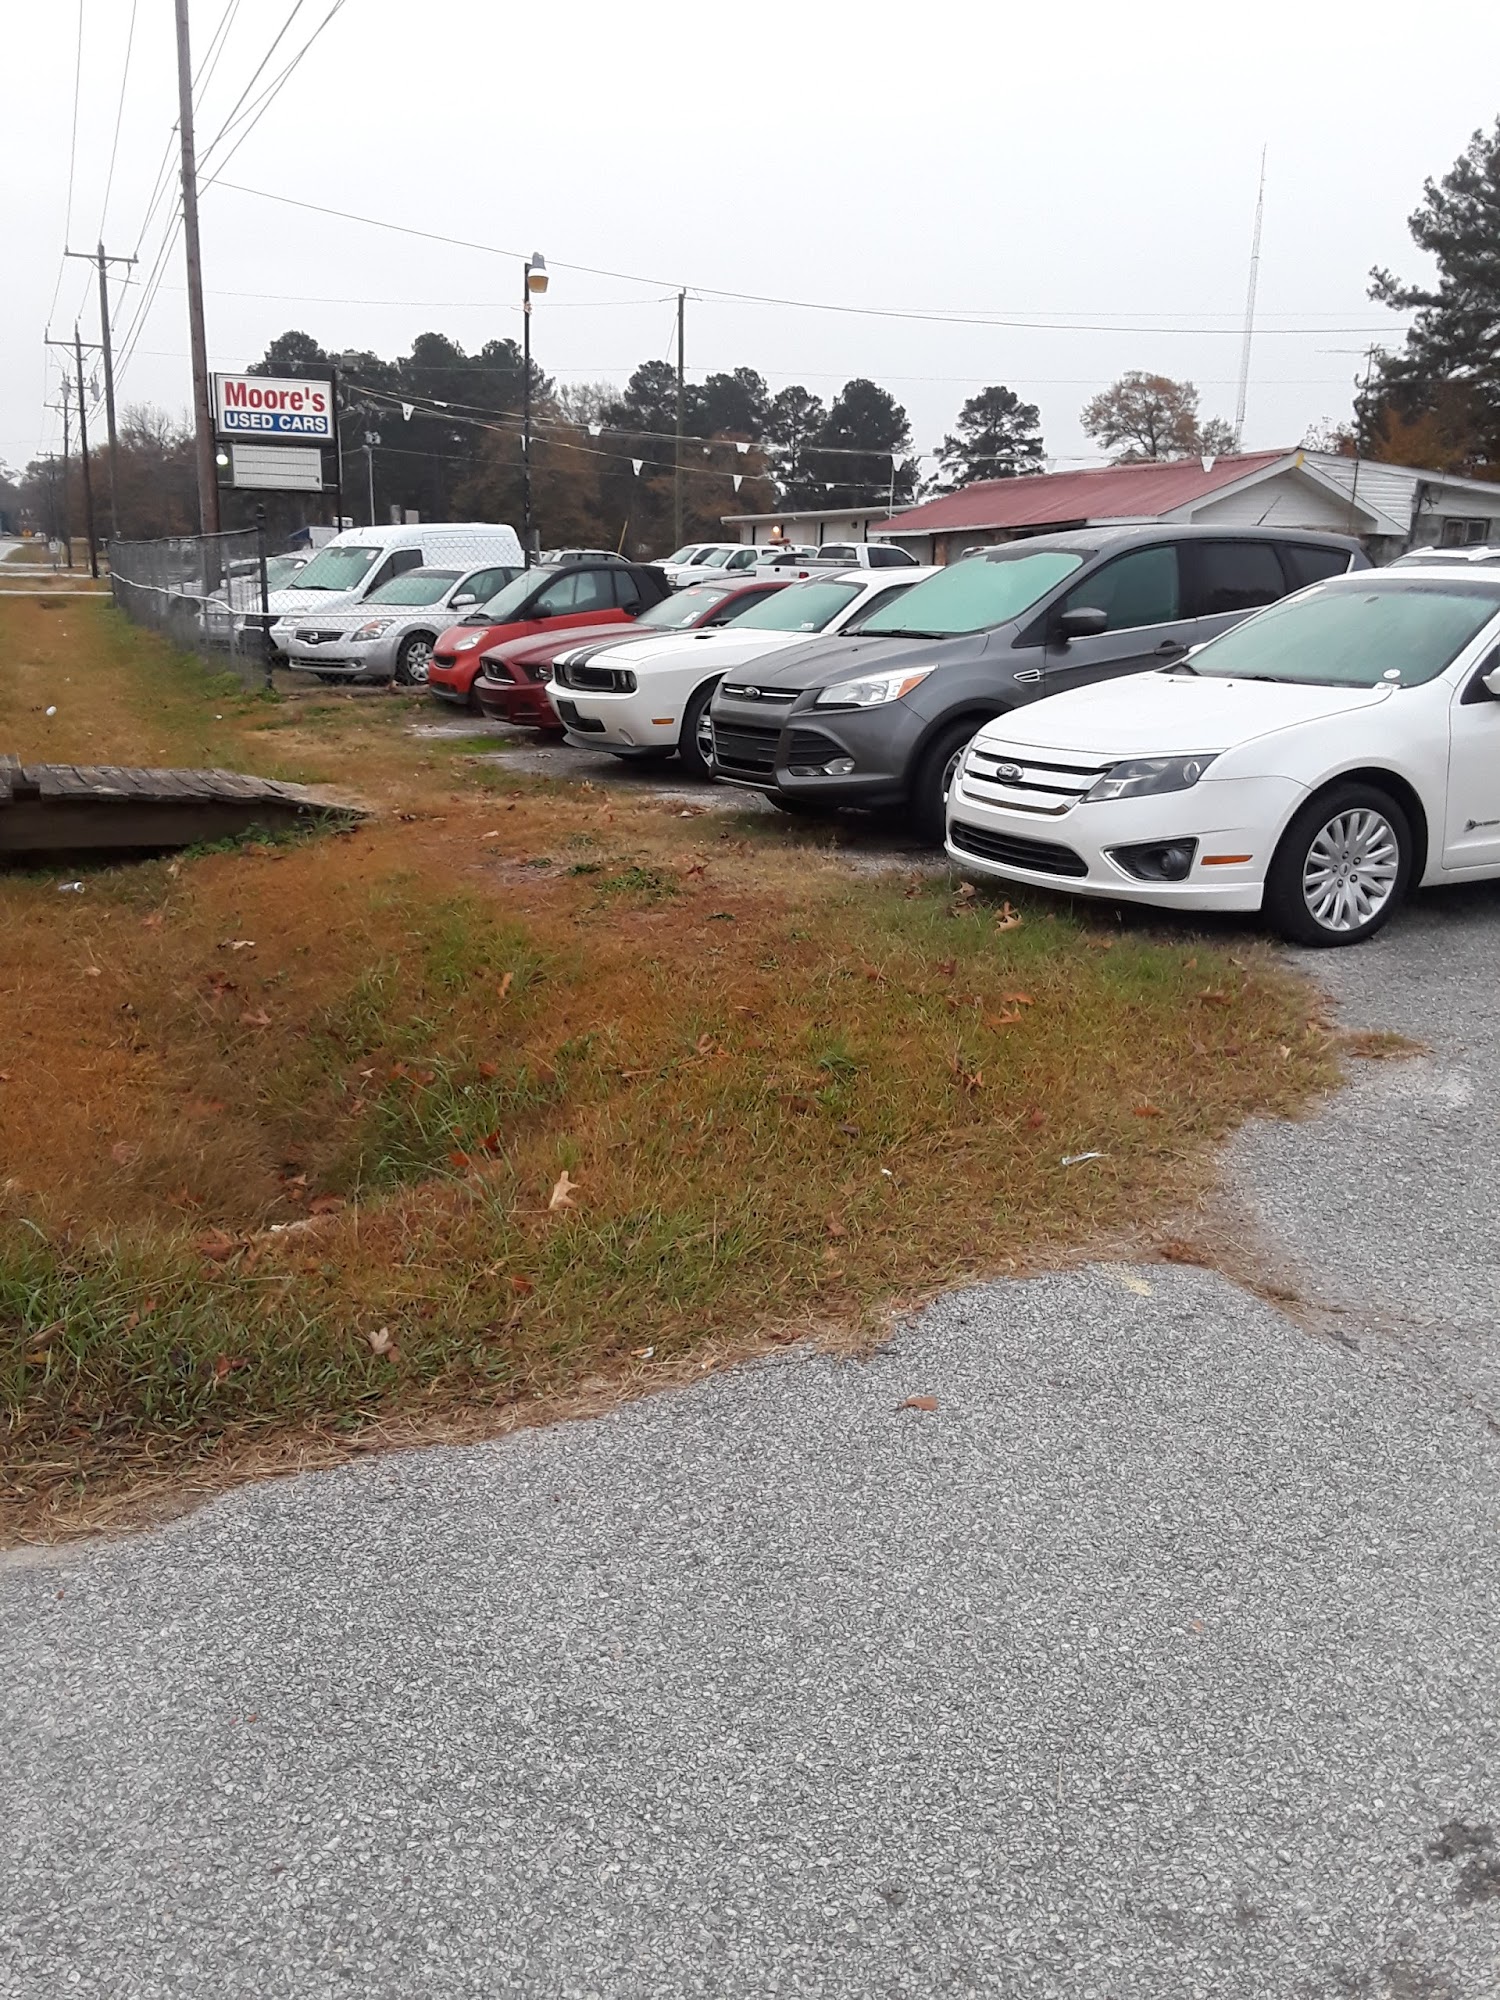 Moore's Used Cars